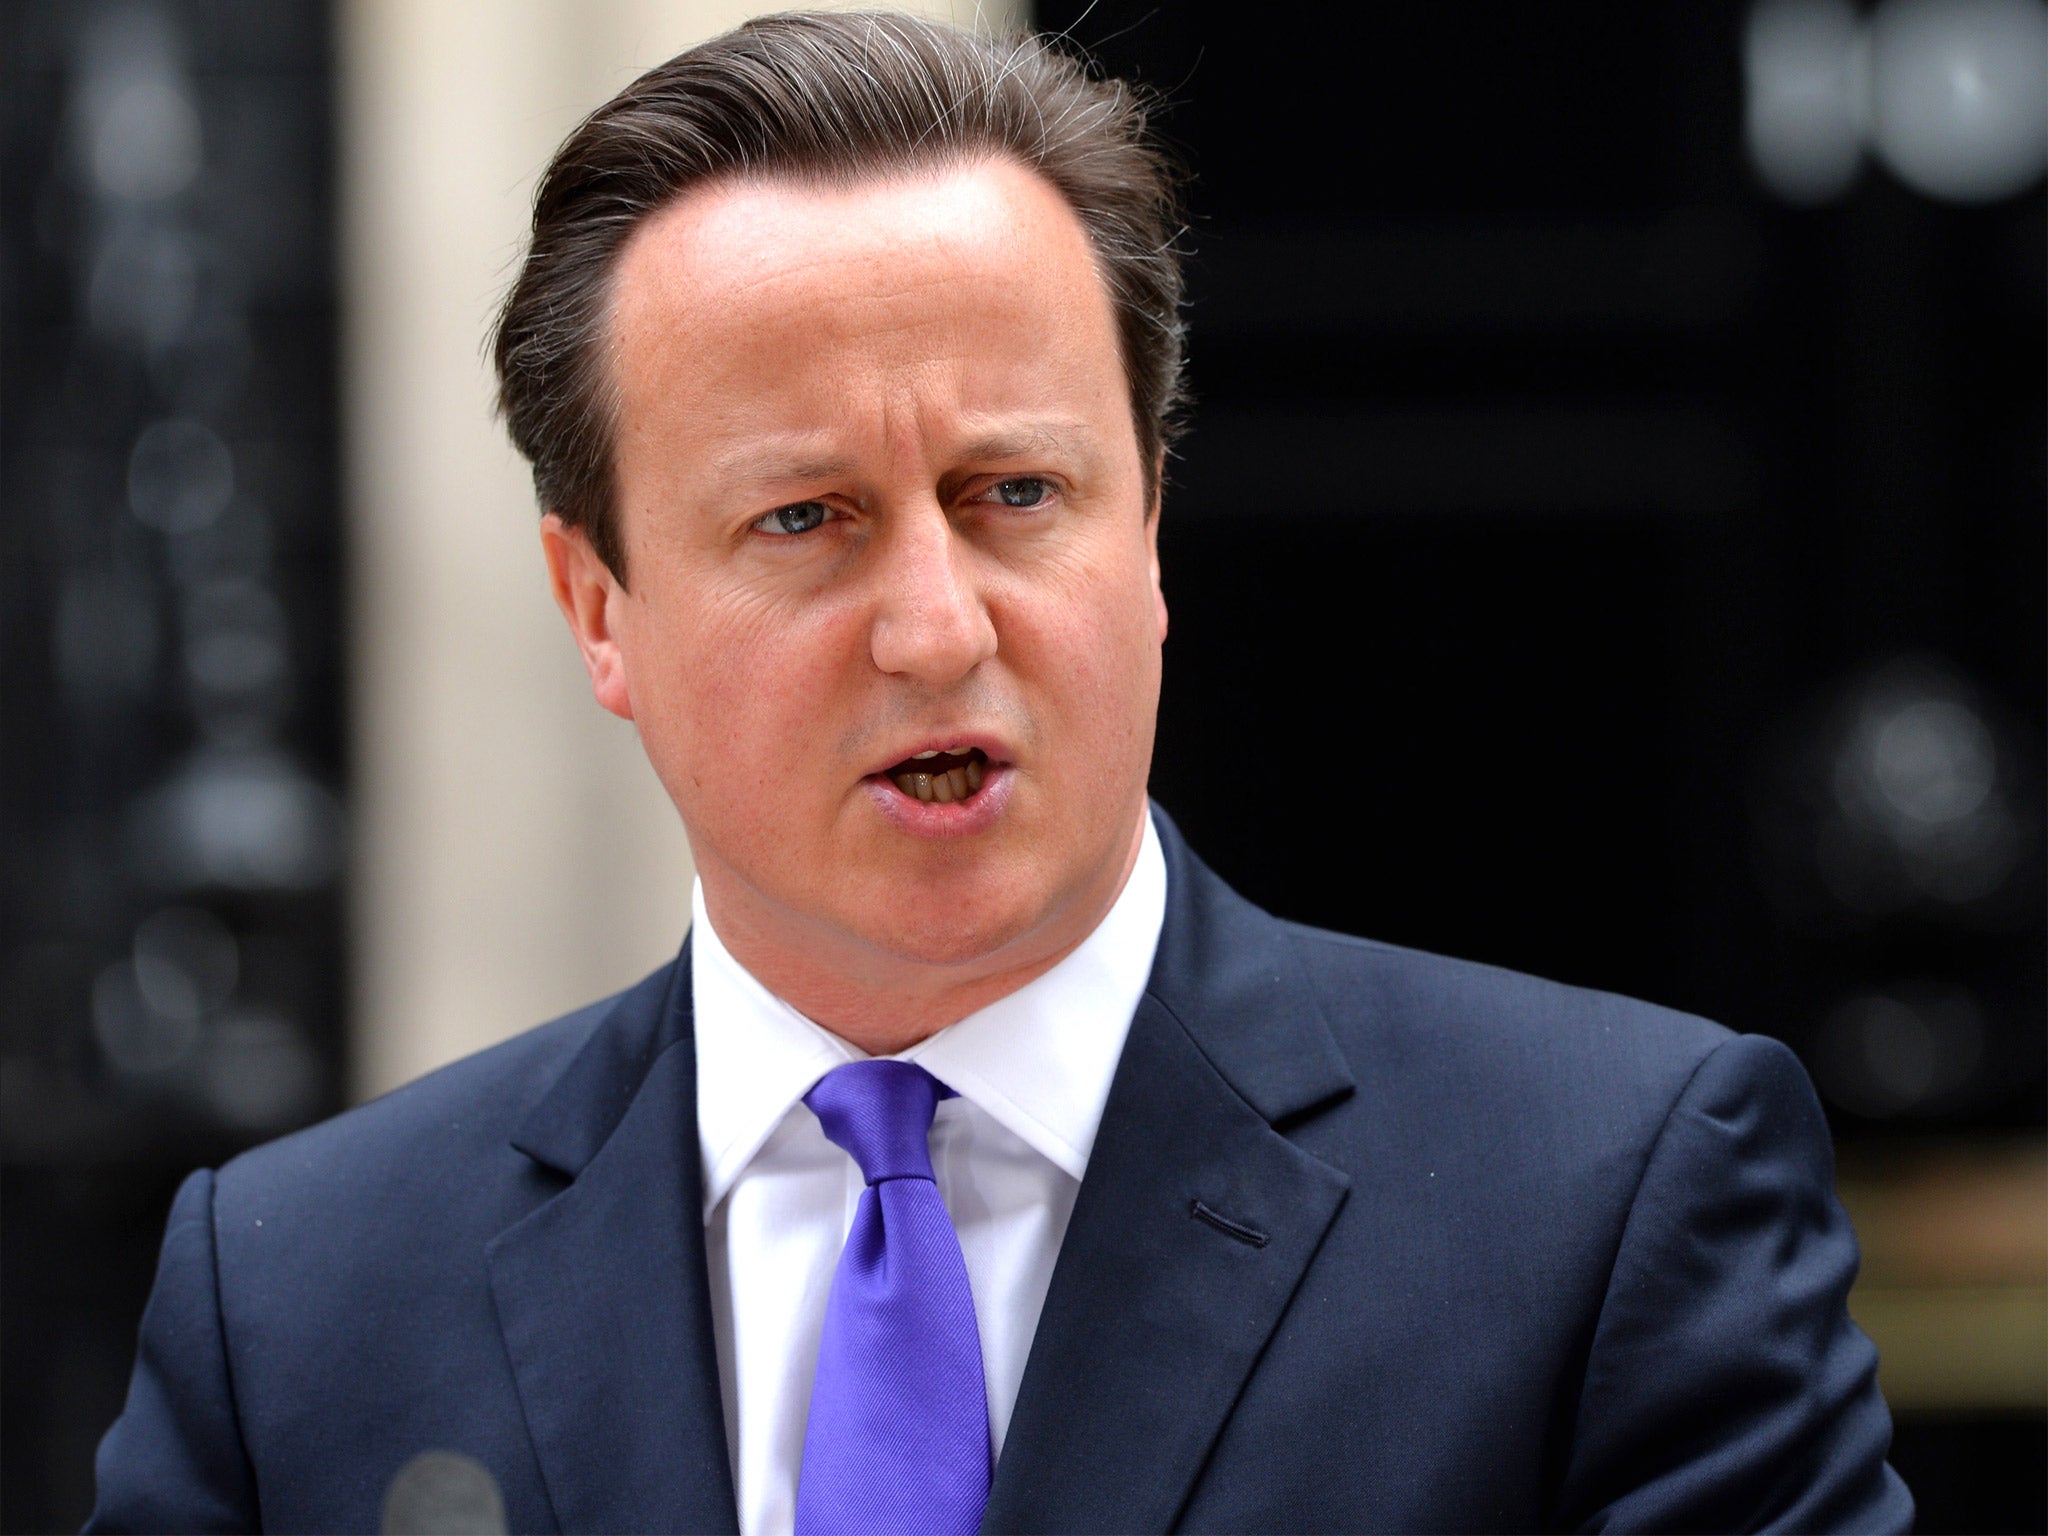 63% of Tory supporters still have confidence in Cameron's leadership